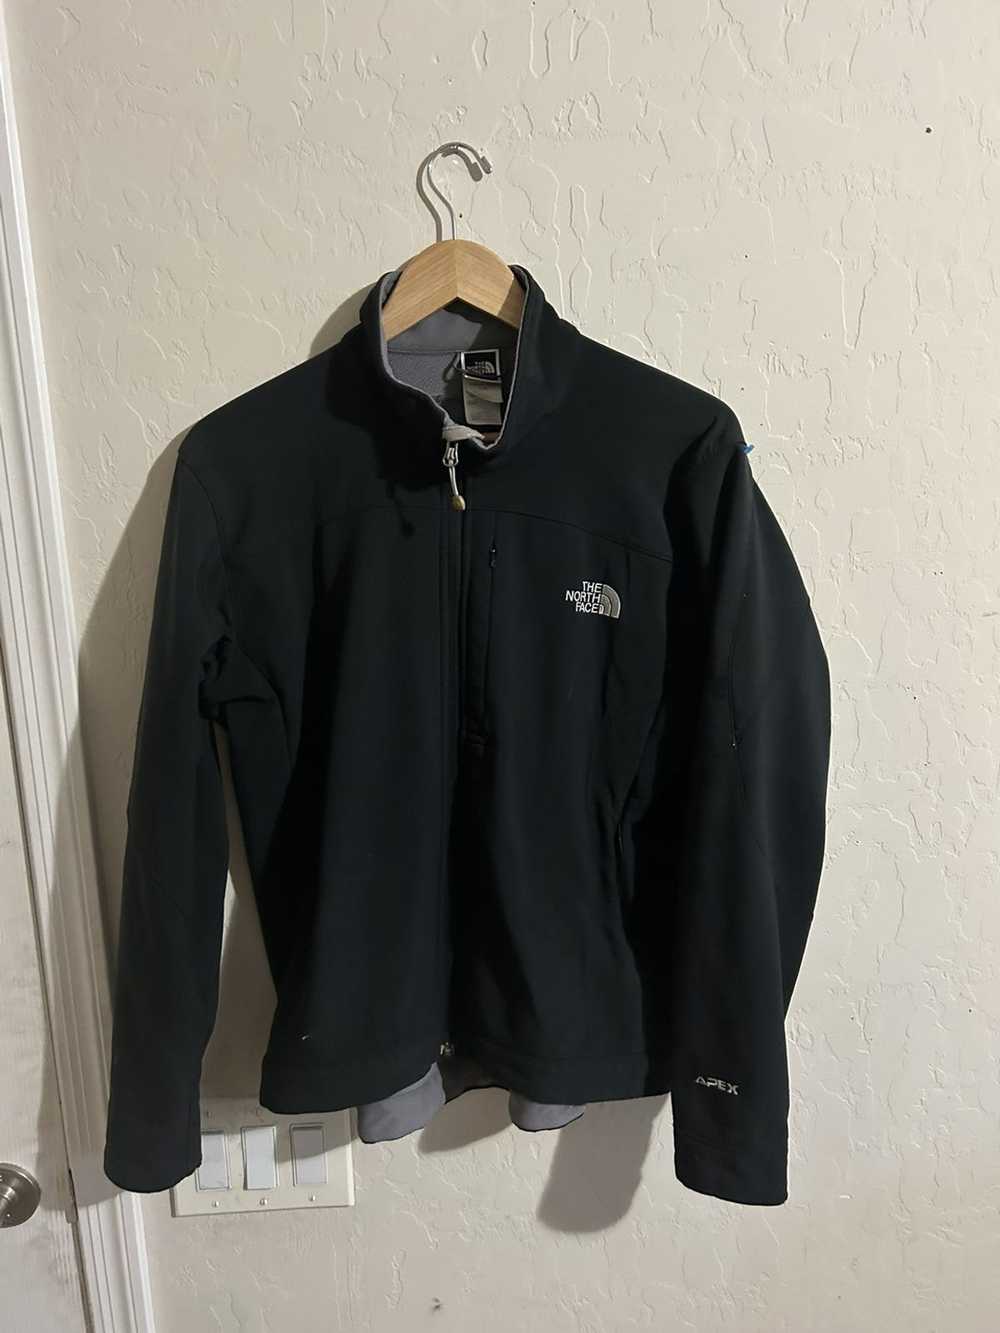 The North Face North Face Apex Jacket - image 6